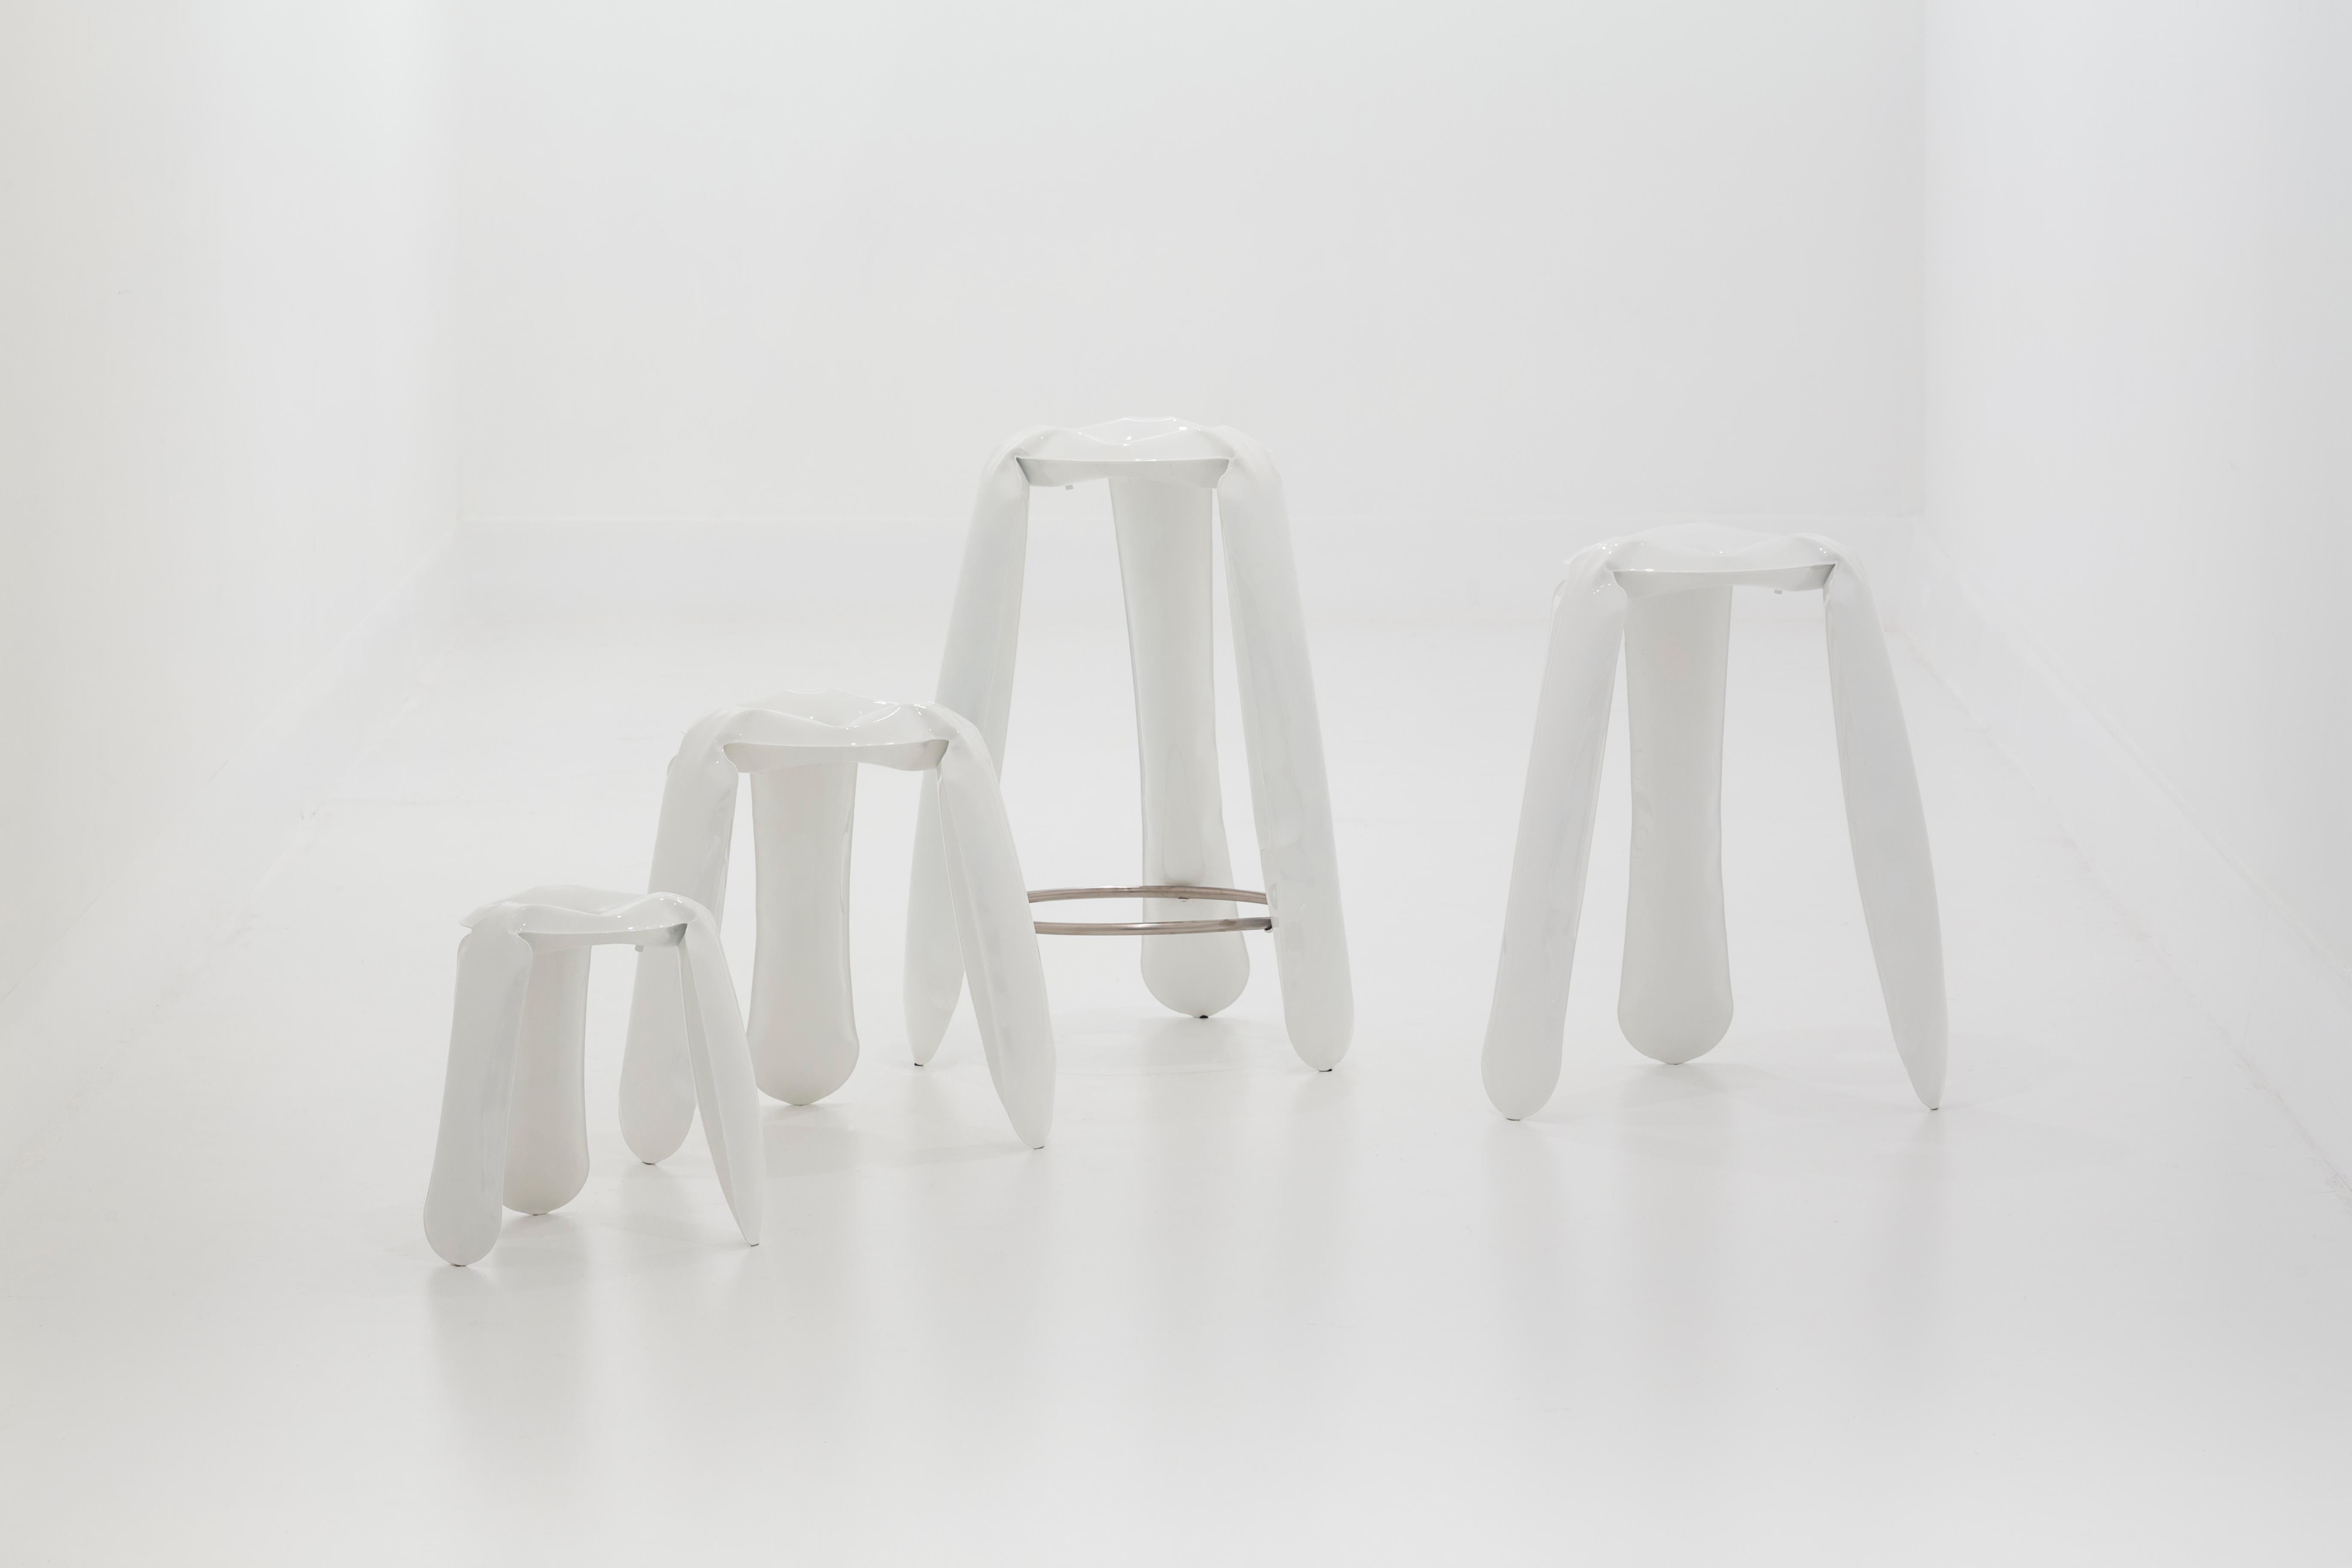 Plopp stool is an icon and a bestseller of Zieta Prozessdesign. The unique, toy-looking and playful shape of Plopp is an effect of an innovative forming method – FIDU. FIDU technology means that two ultra-thin steel sheets are welded together around